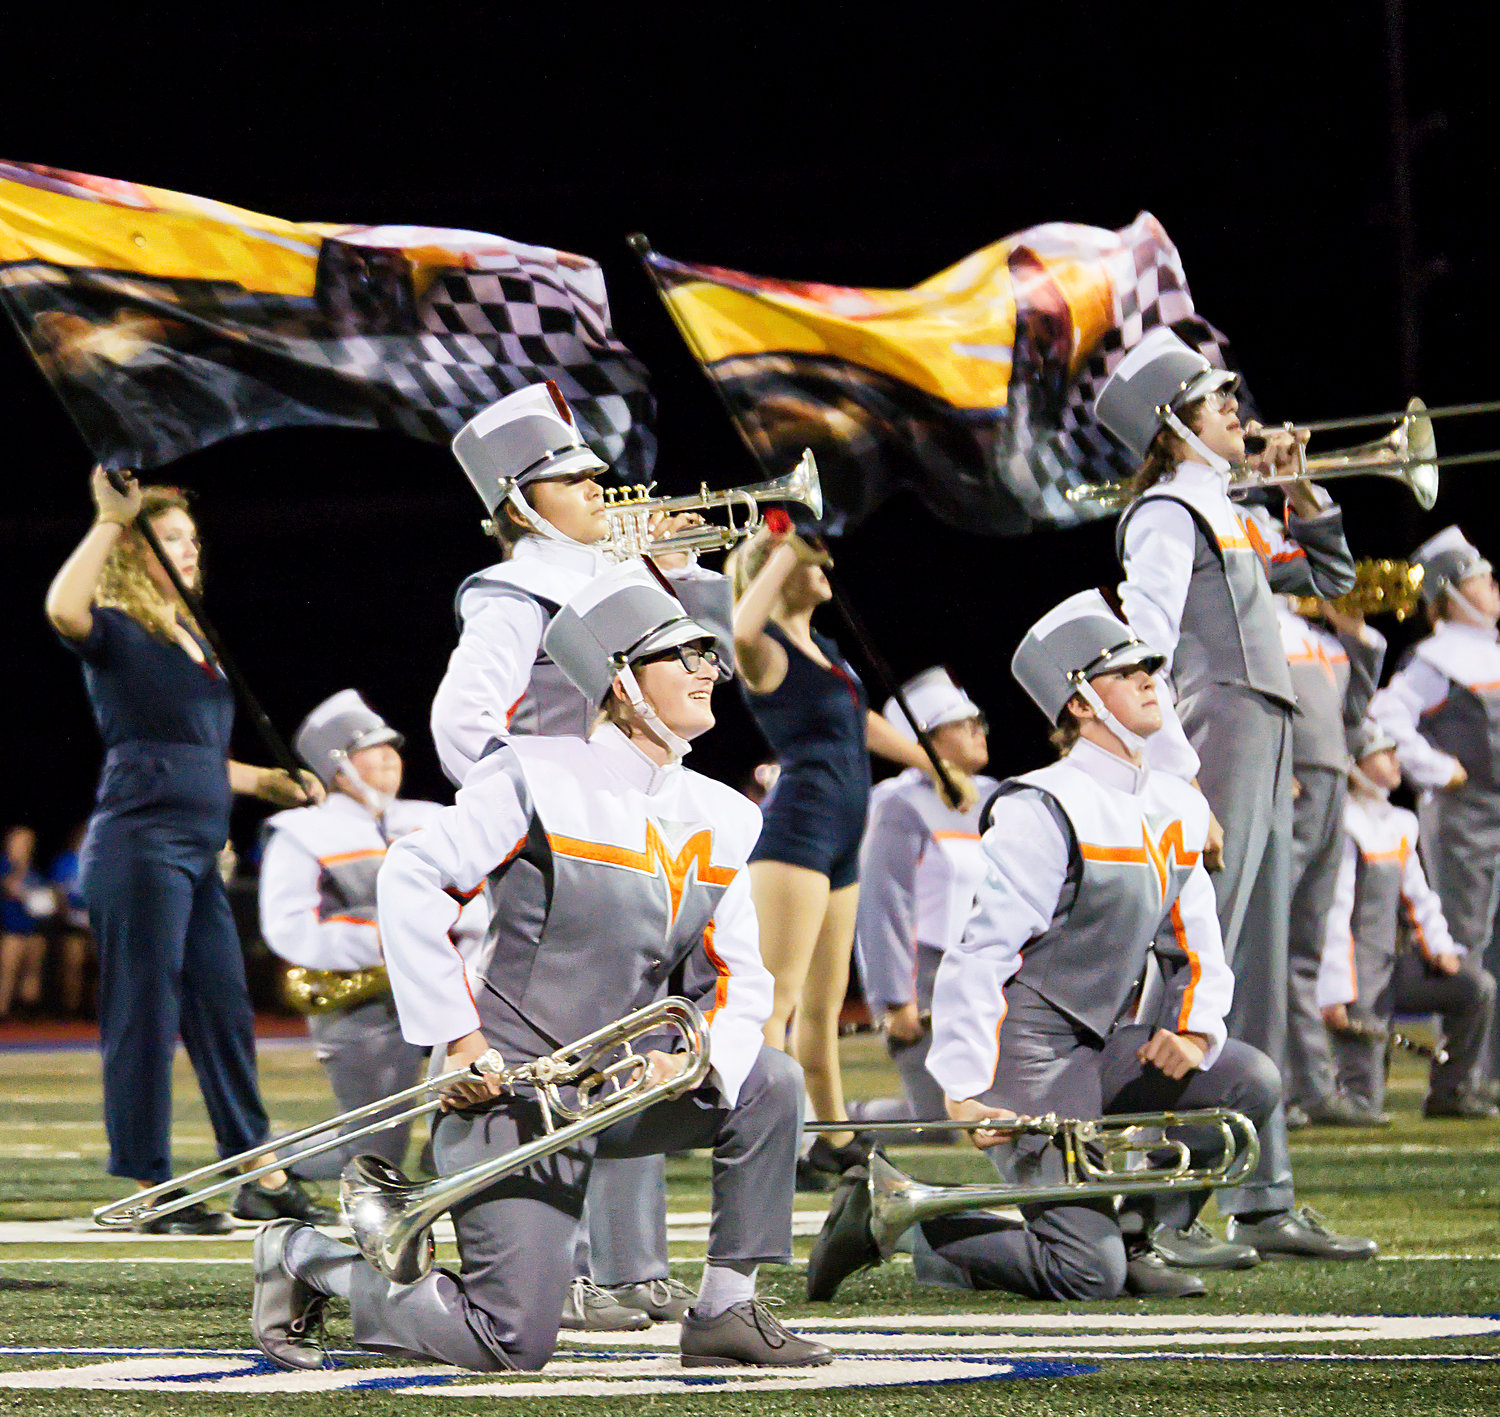 Mineola Sound of the Swarm members during a recent halftime performance.